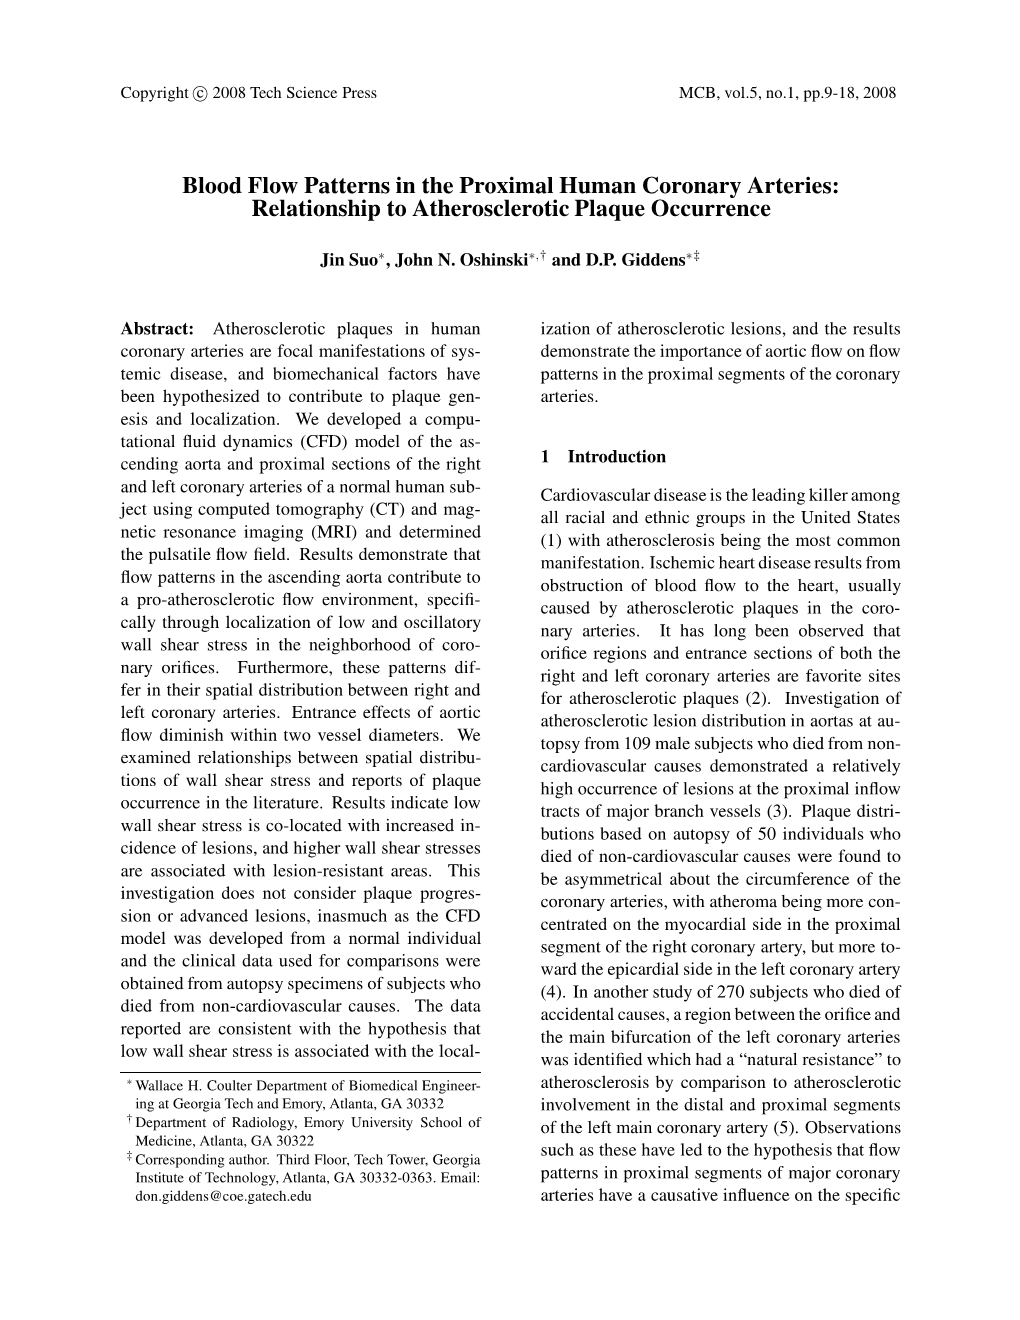 Blood Flow Patterns in the Proximal Human Coronary Arteries: Relationship to Atherosclerotic Plaque Occurrence